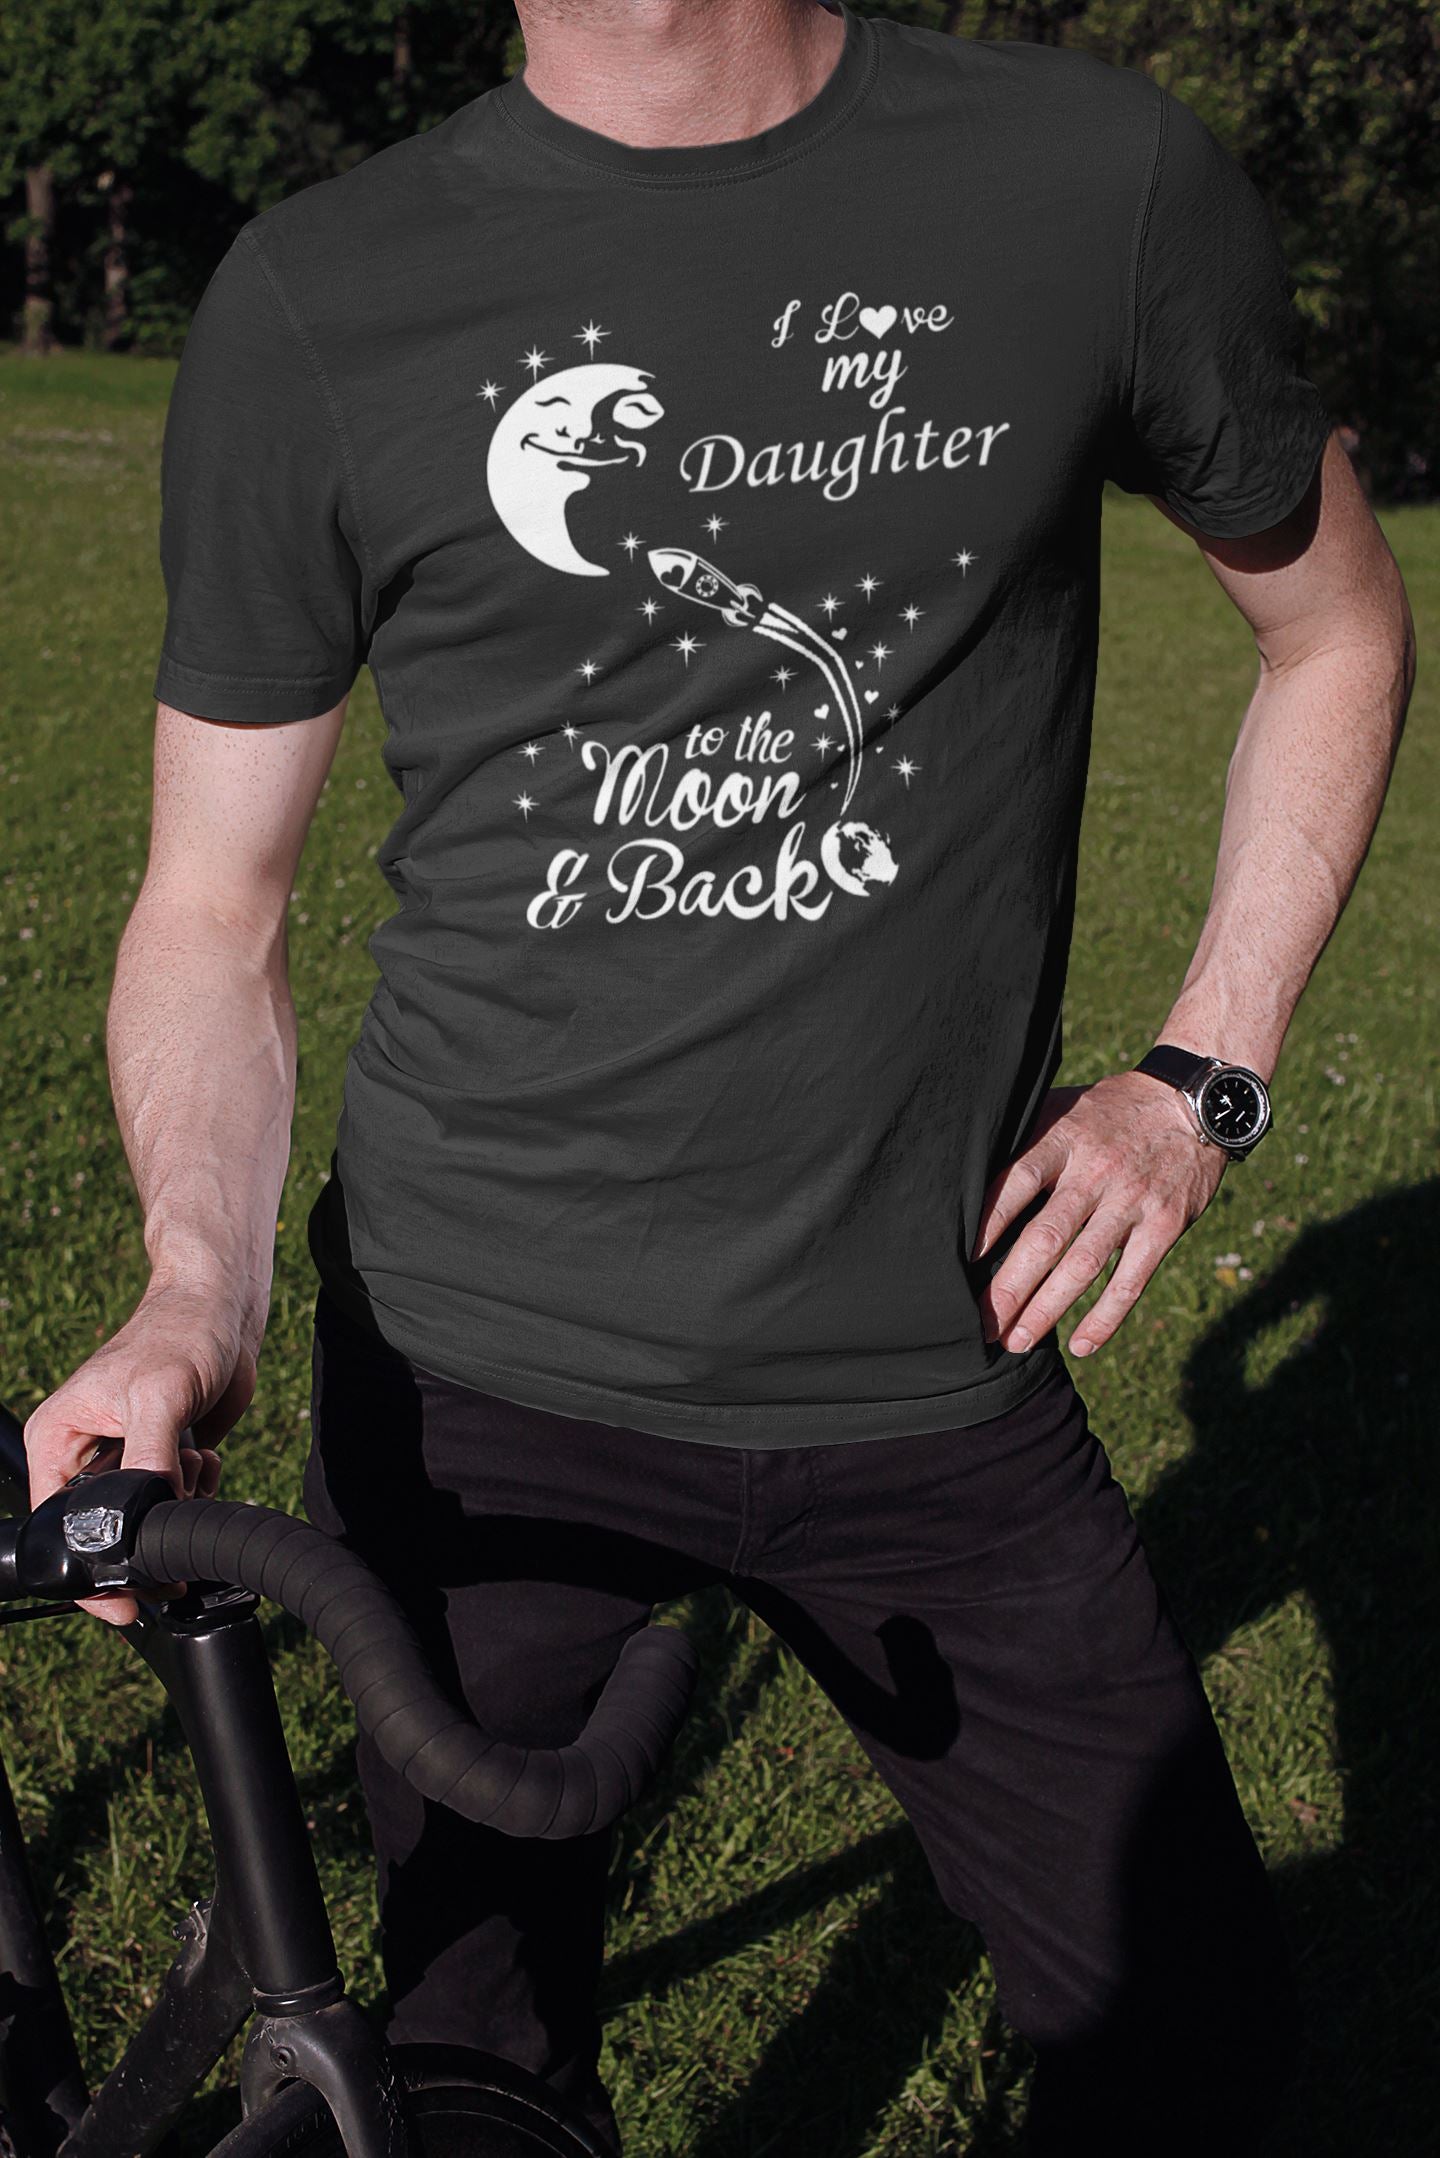 I Love My Daughter to the Moon and Back Special Family T Shirt for Men and Women freeshipping - Catch My Drift India